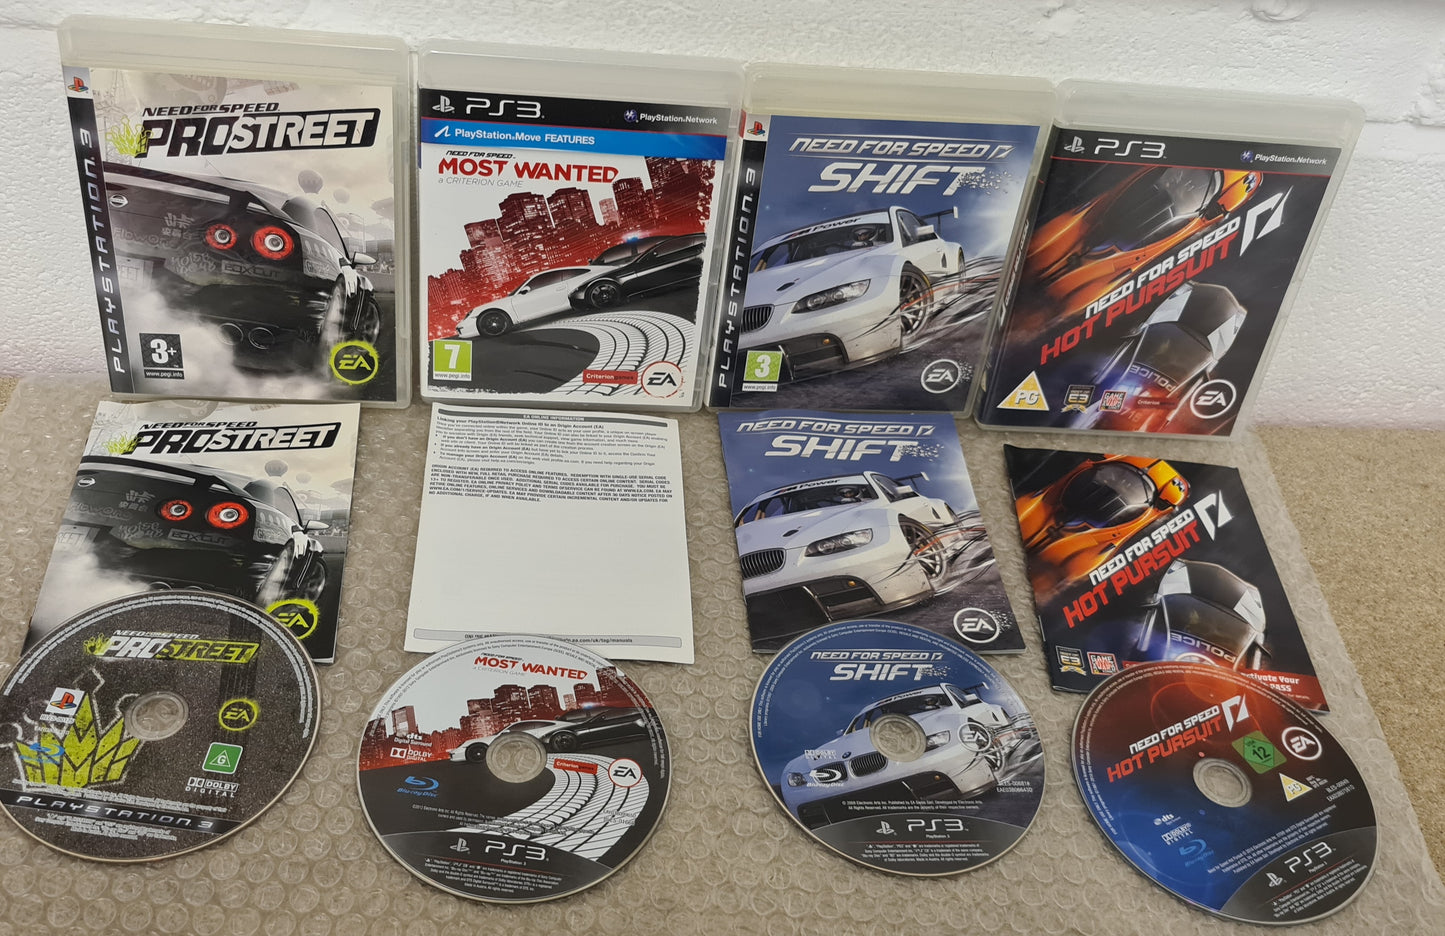 Need for Speed X 4 Sony Playstation 3 (PS3) Game Bundle